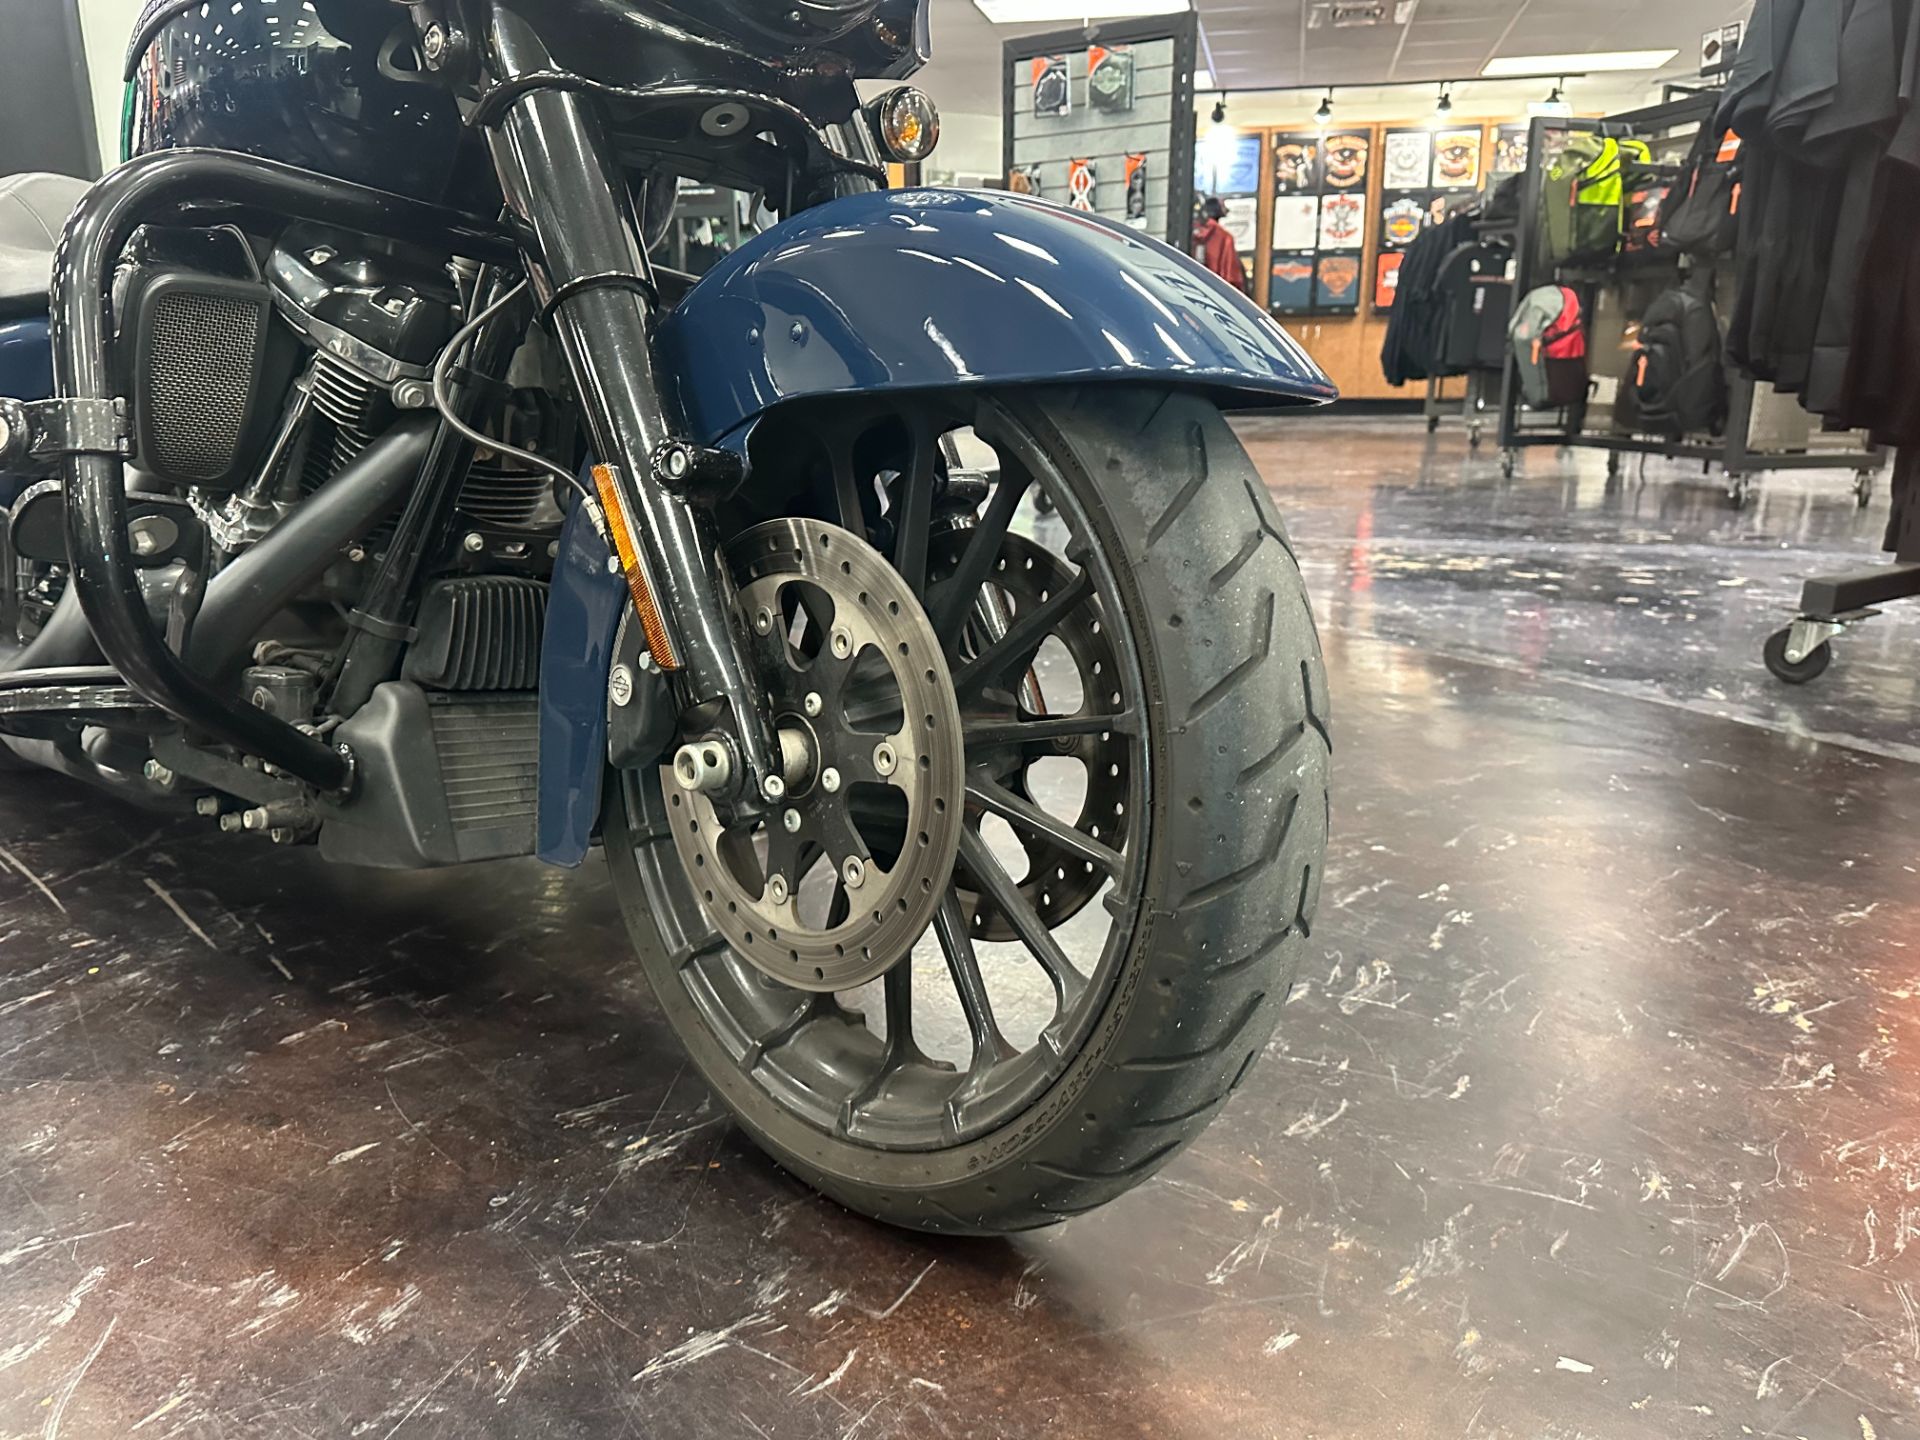 2019 Harley-Davidson Street Glide® Special in Metairie, Louisiana - Photo 4